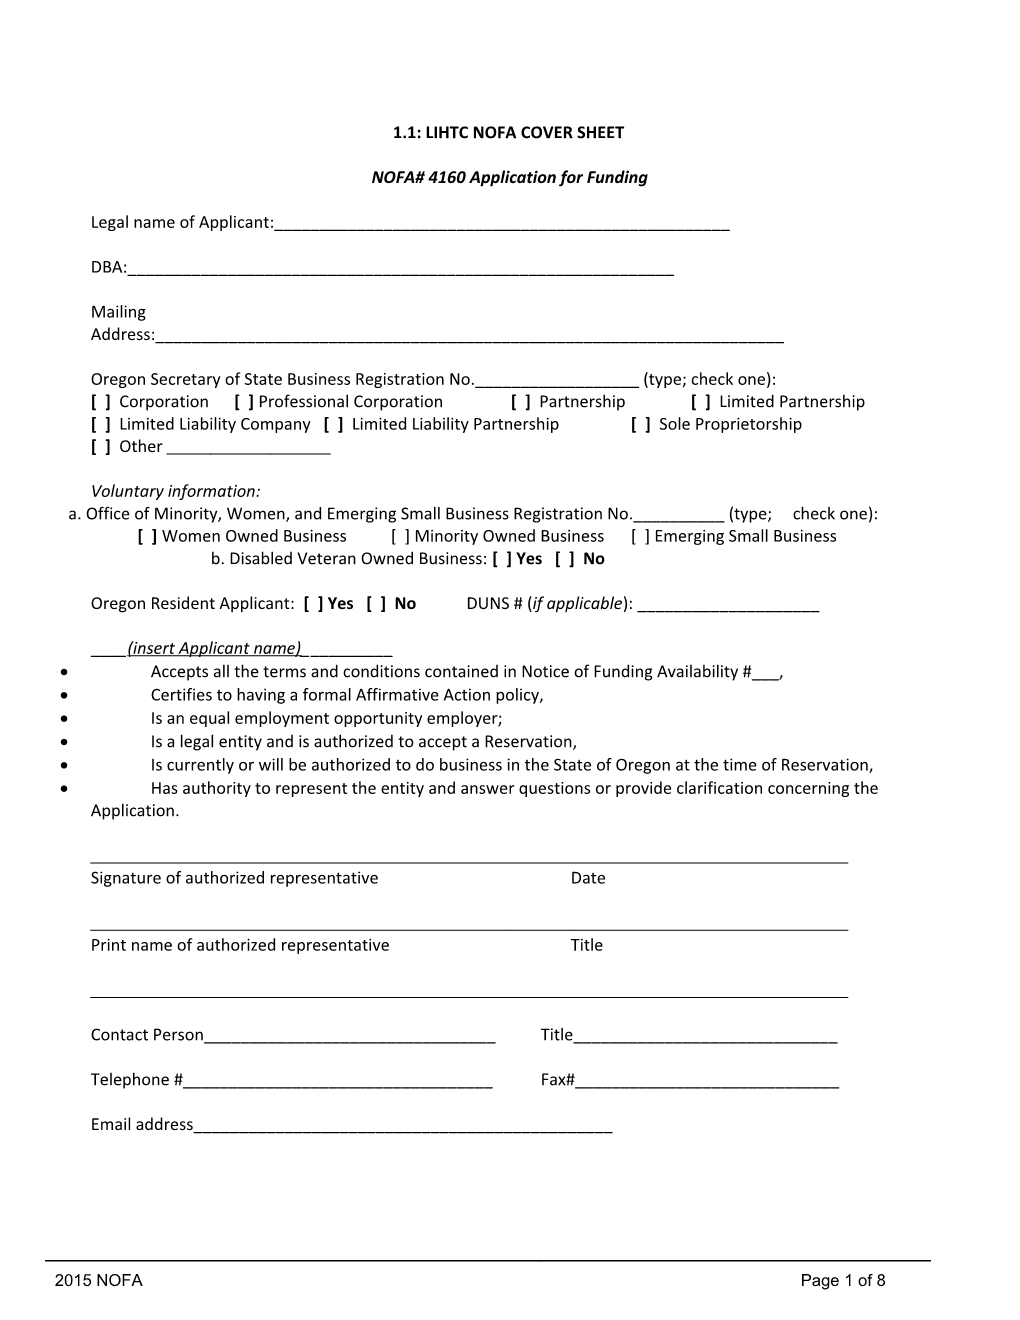 2015 NOFA NOFA Instructions Part 1 - Application Submittal